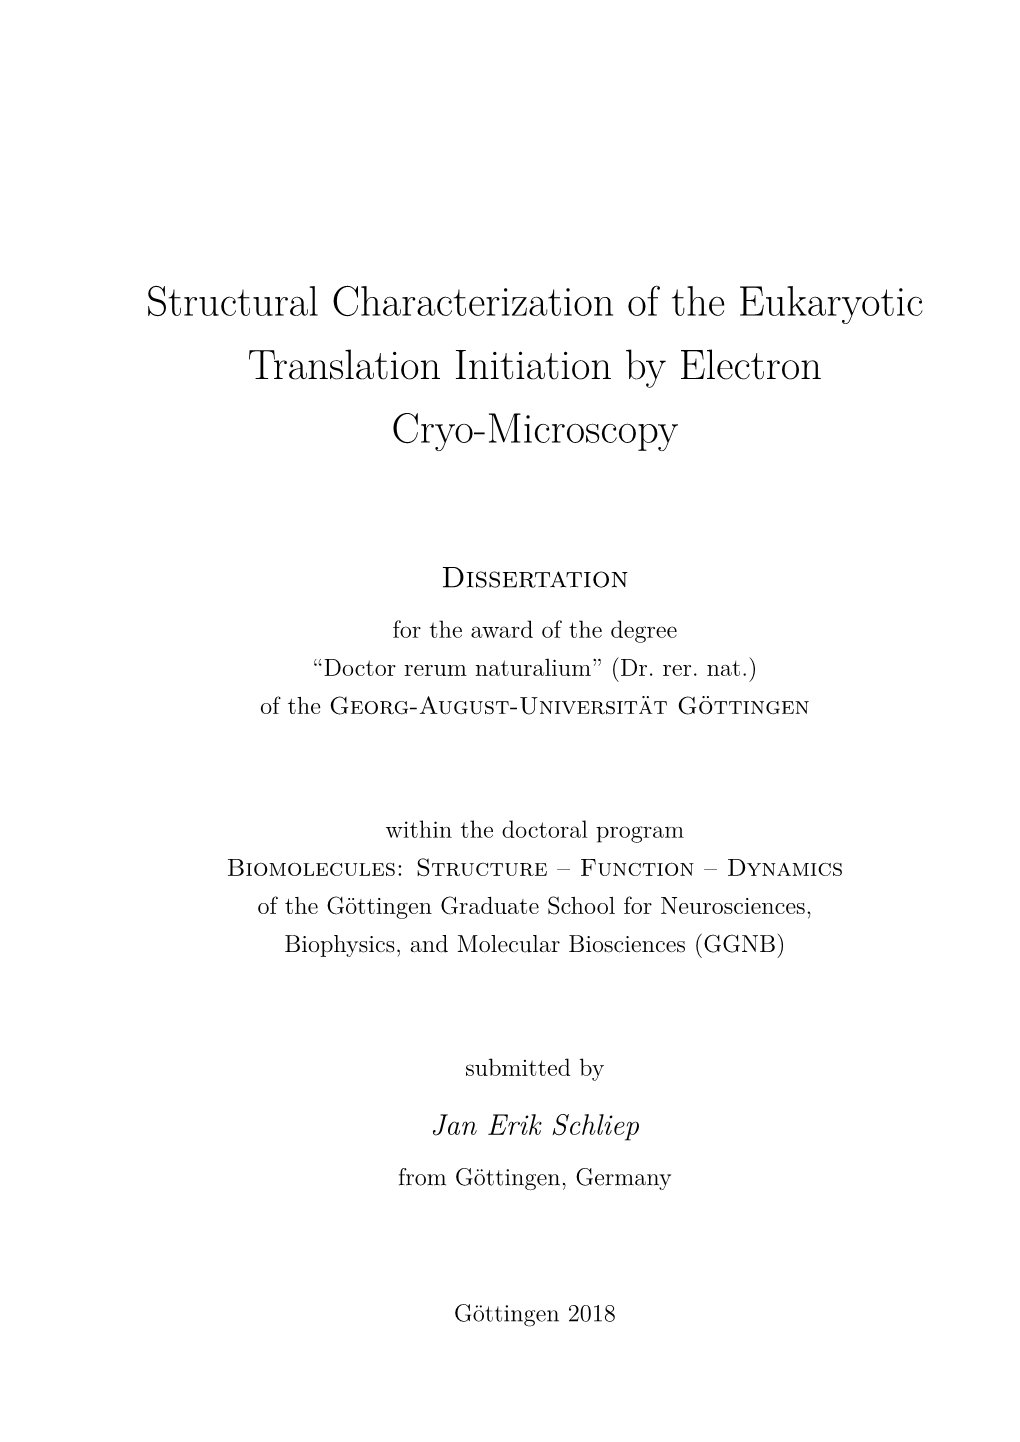 Structural Characterization of the Eukaryotic Translation Initiation by Electron Cryo-Microscopy